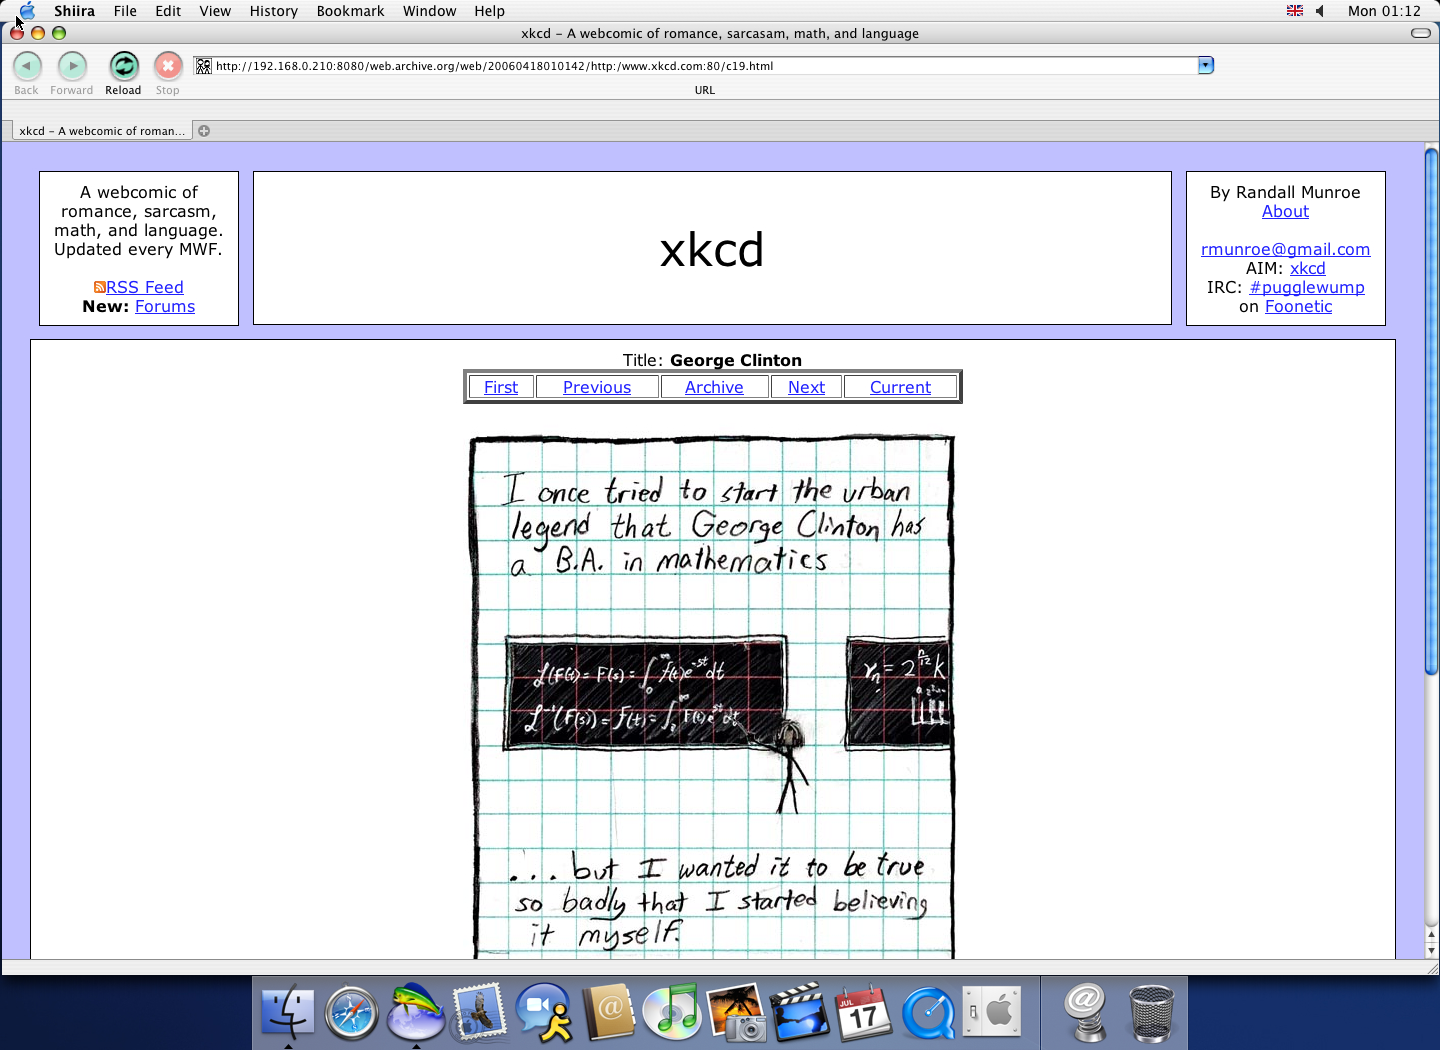 OS X 10.3 PPC with Shiira 0.9.1 displaying a page from XKCD archived at April 18, 2006 at 01:01:42